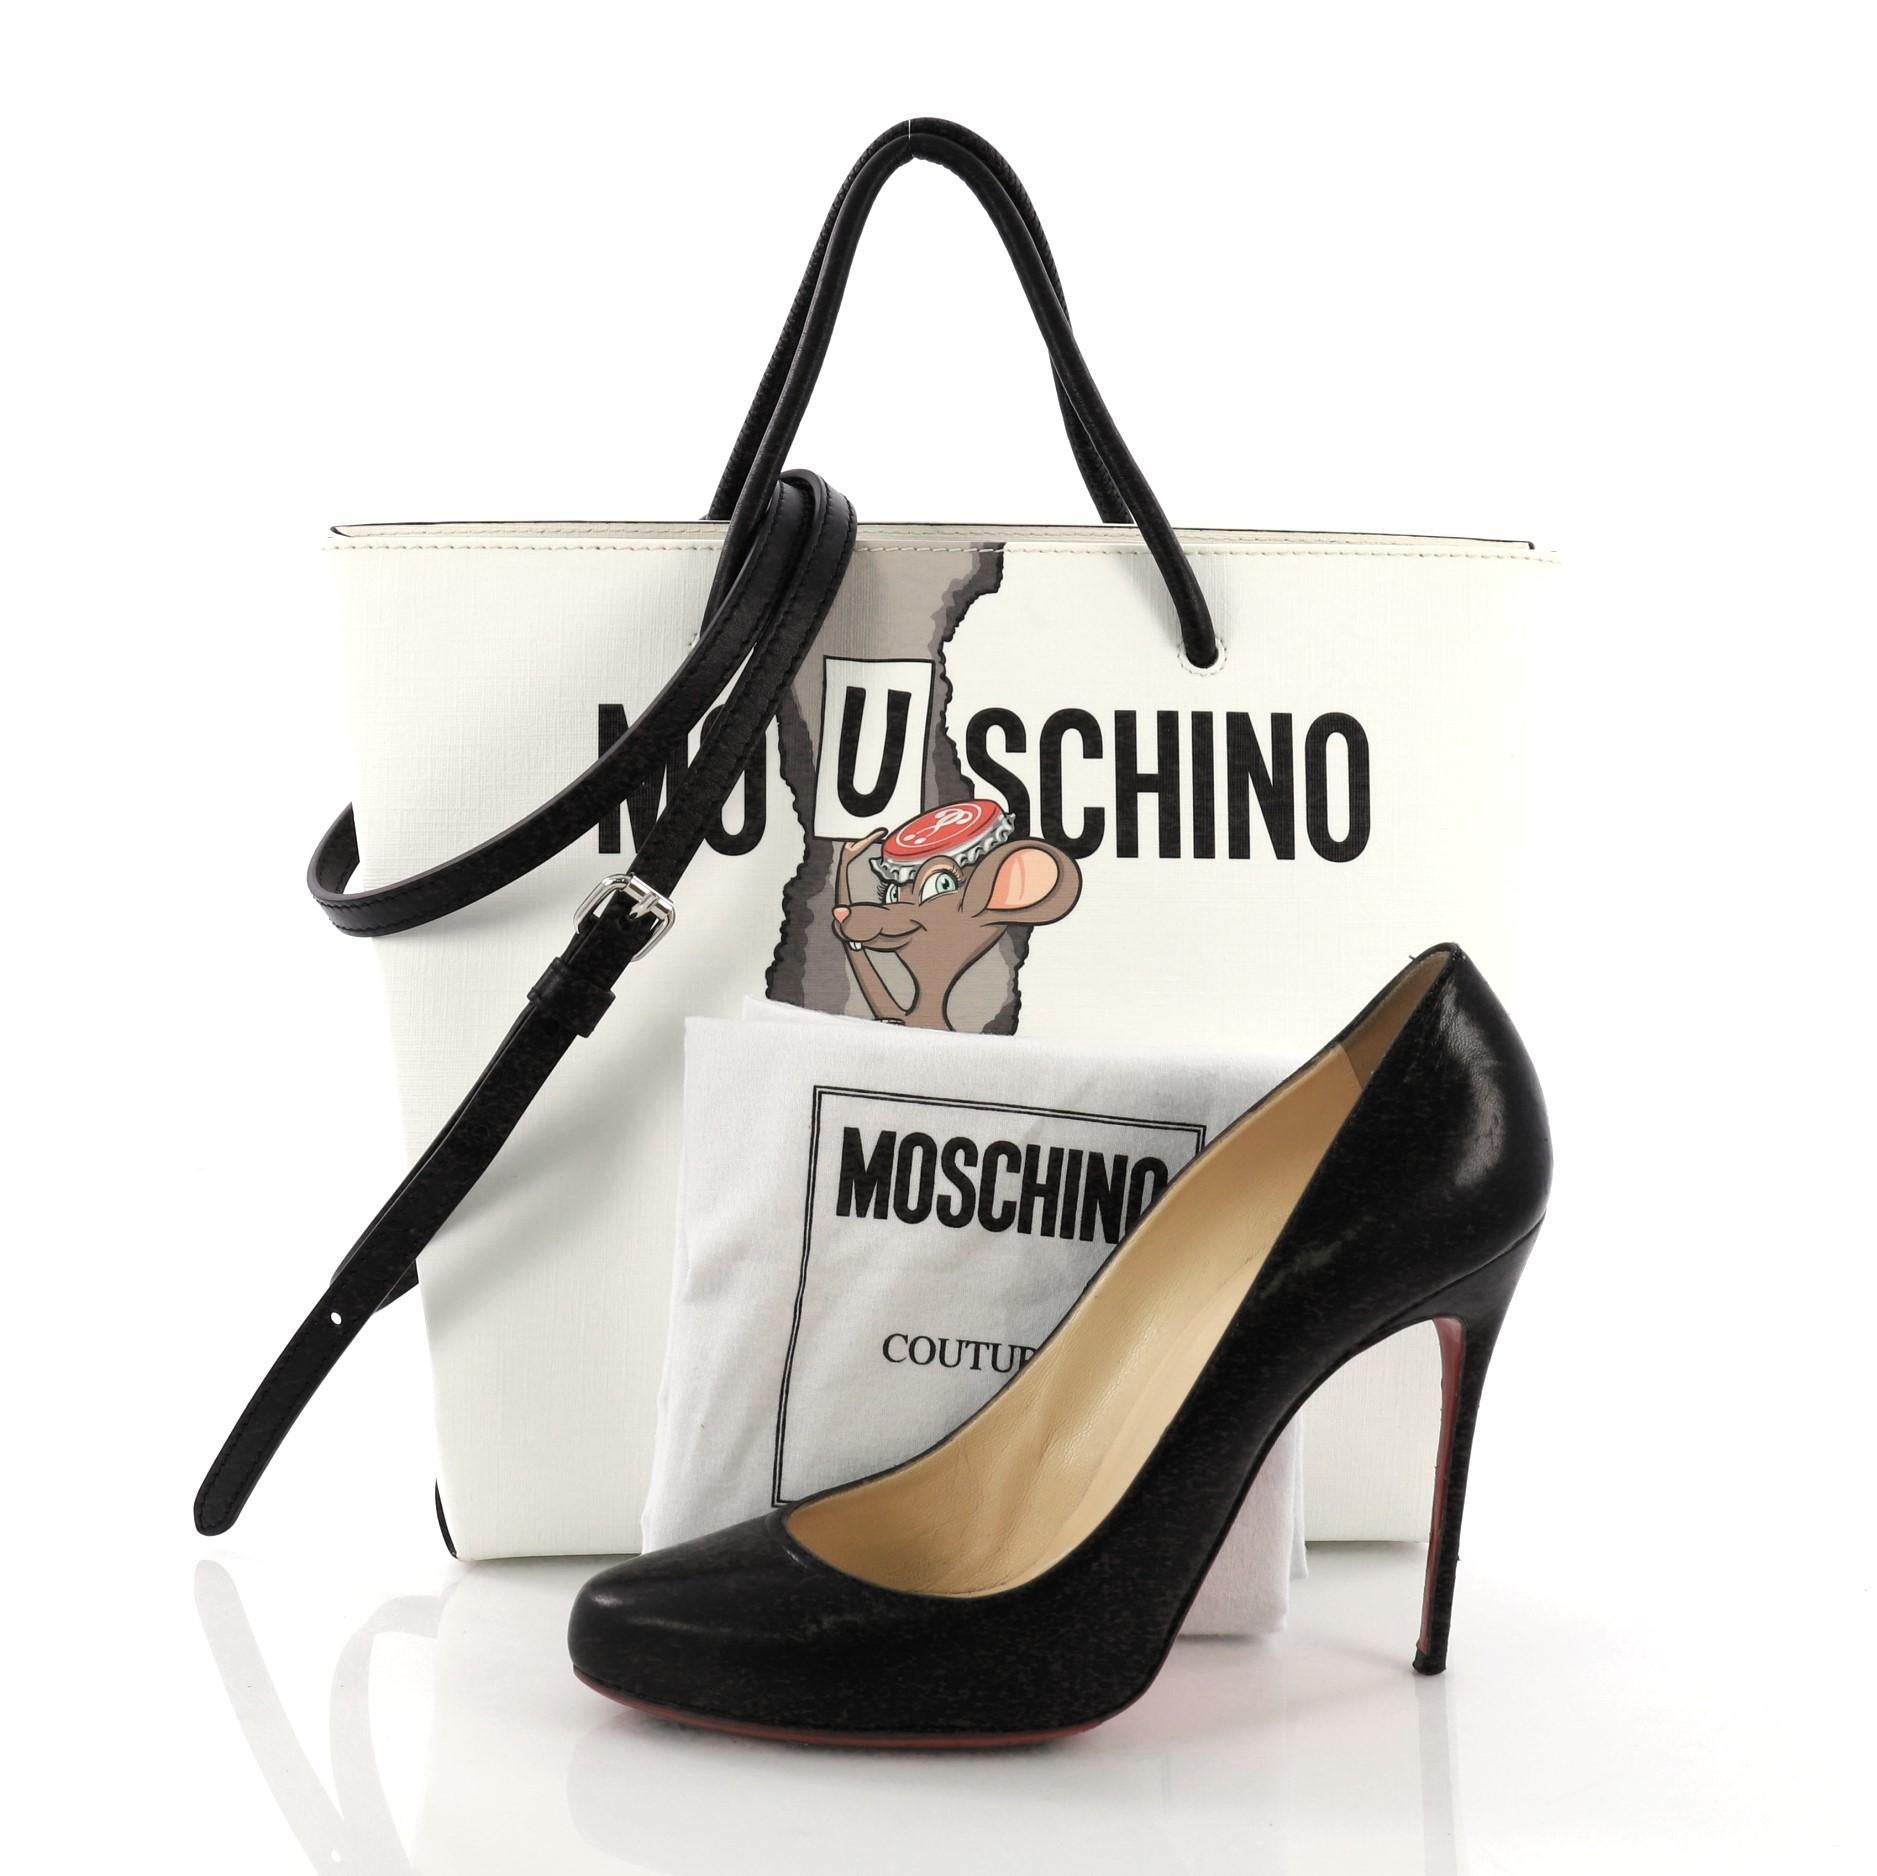 This Moschino Rat-a-Porter Tote Printed PVC, crafted in white printed pvc, features 